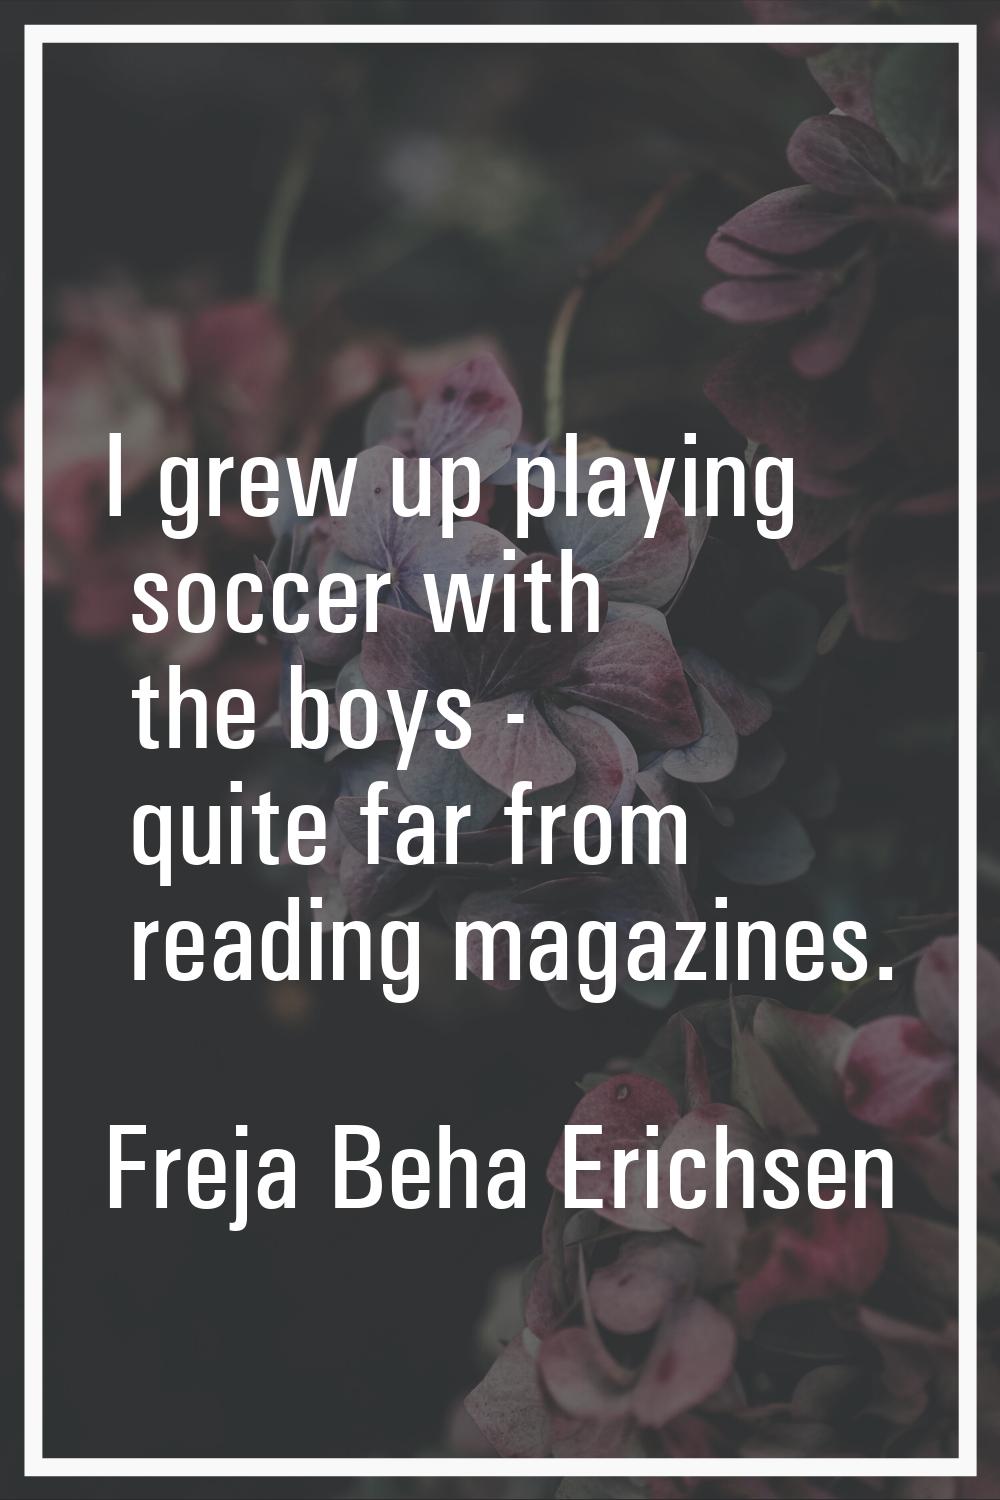 I grew up playing soccer with the boys - quite far from reading magazines.